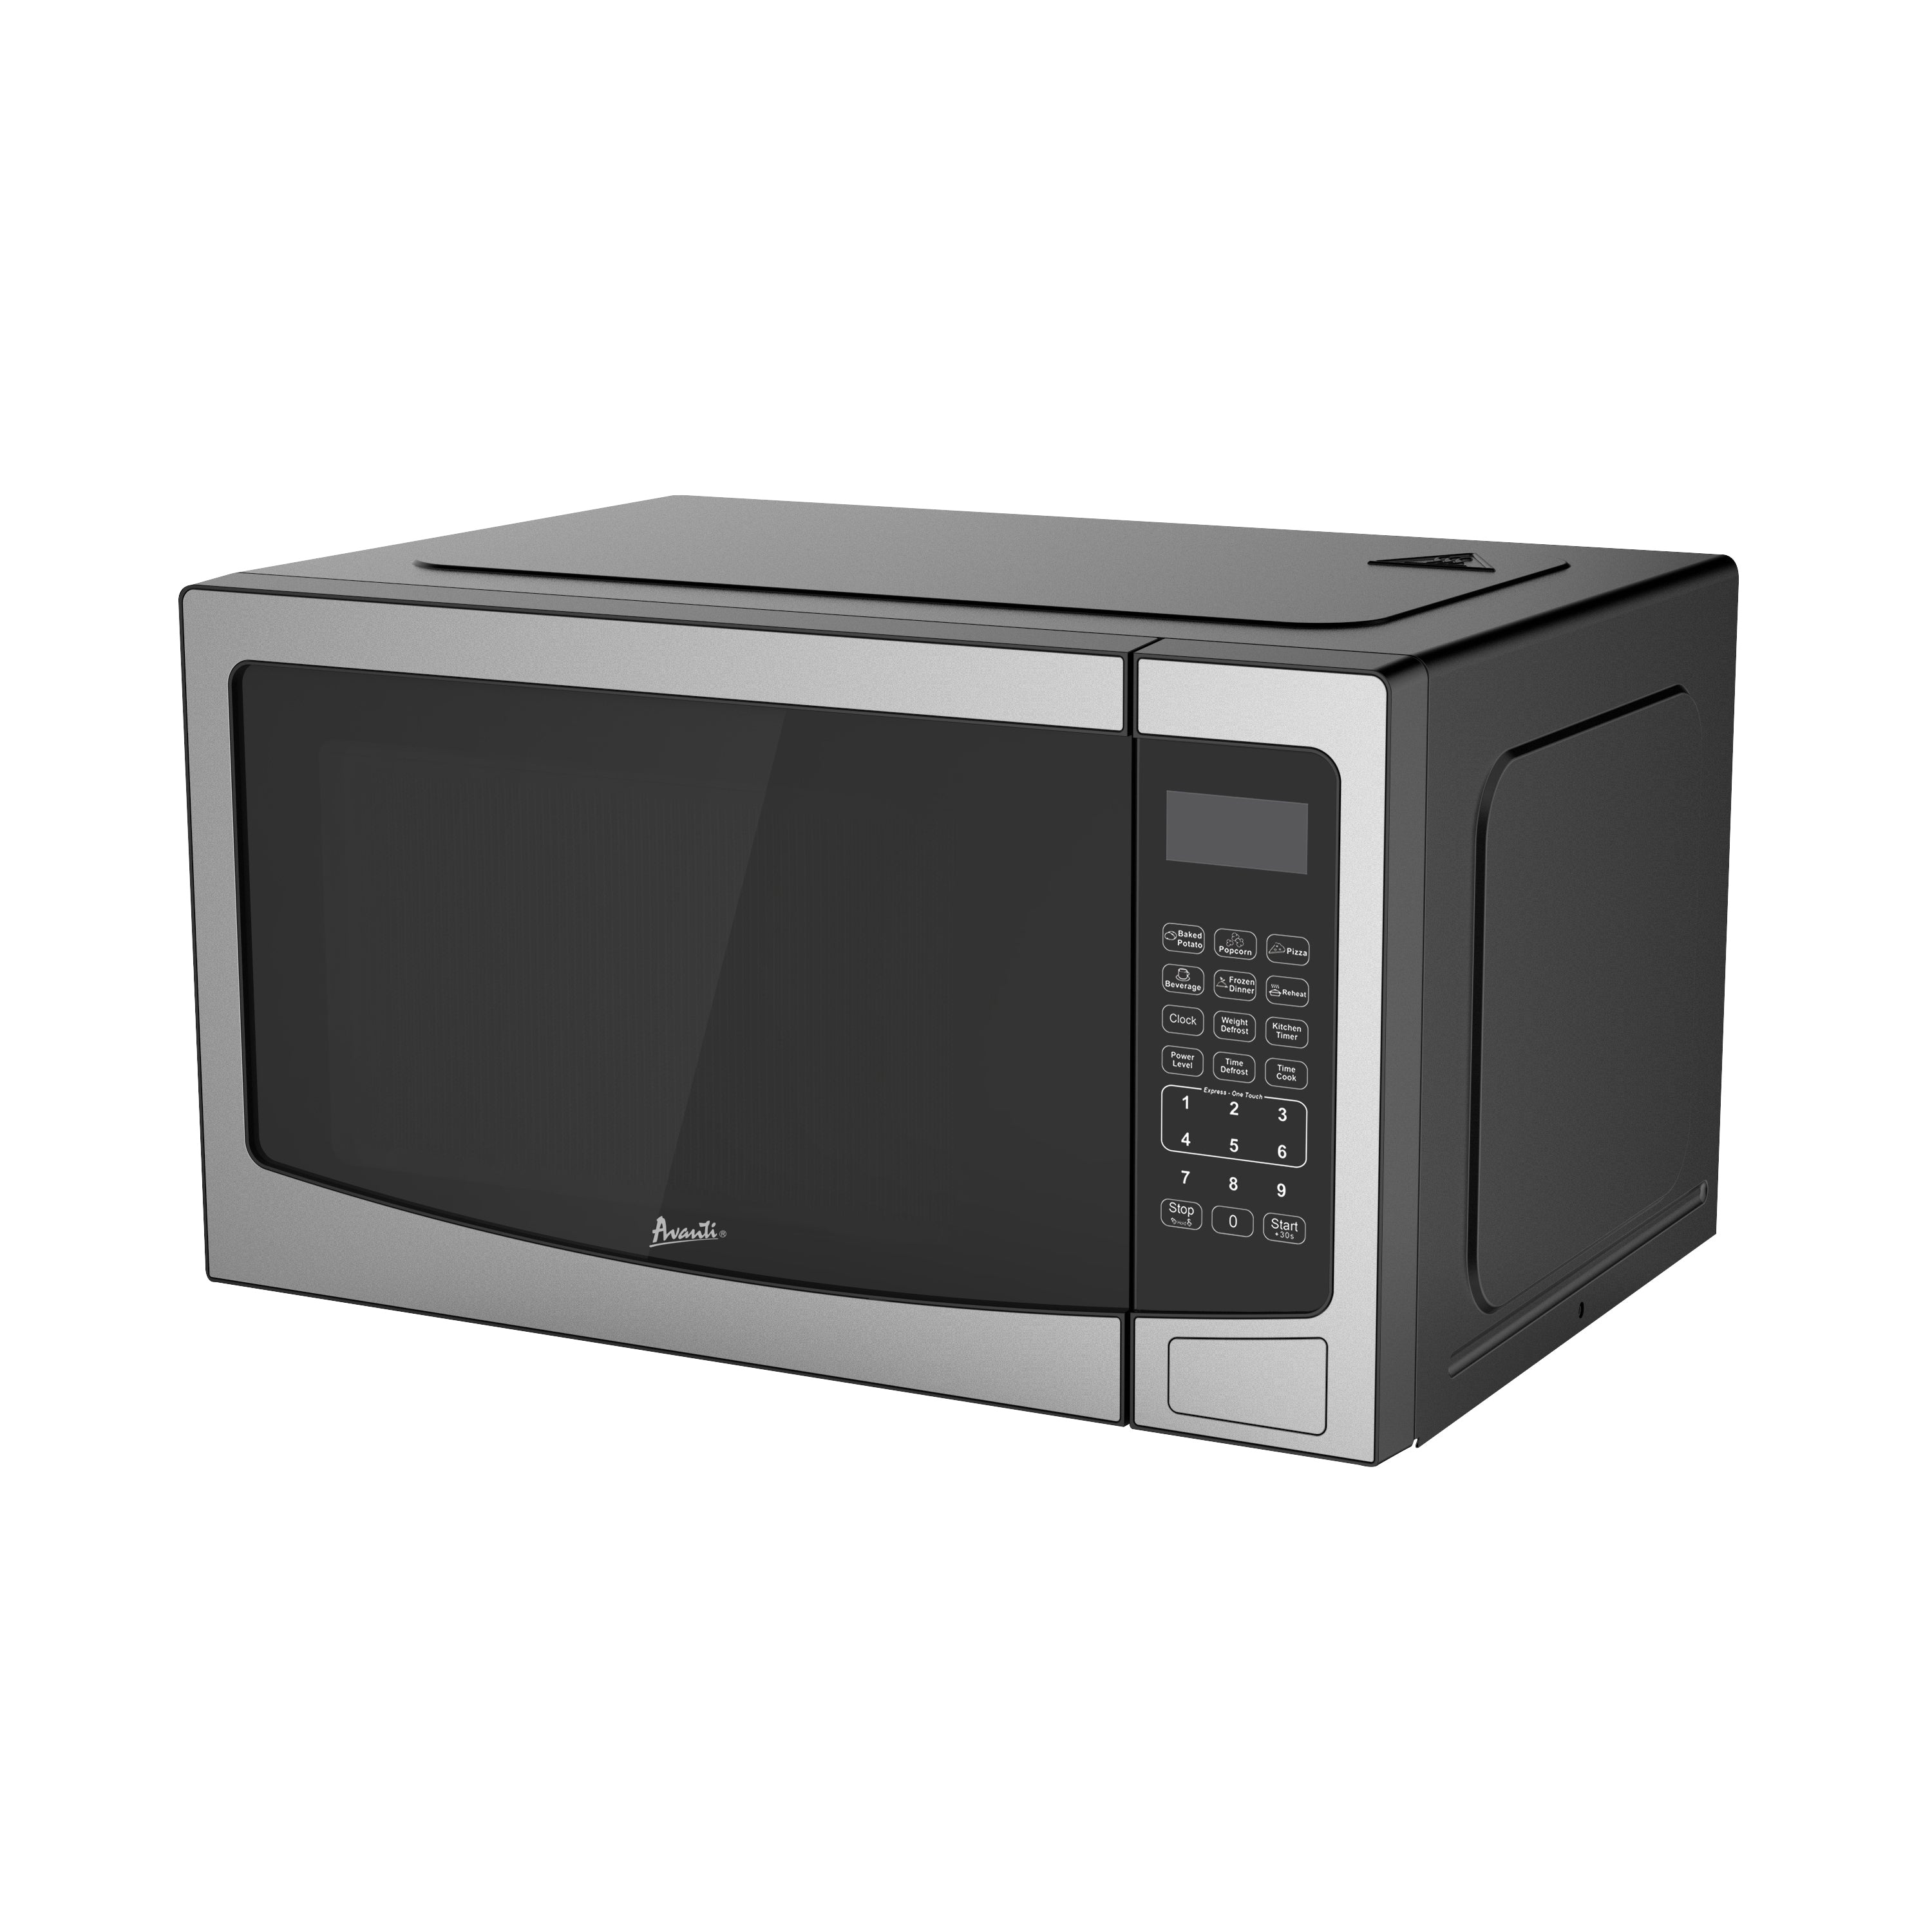 1.1 CU FT Microwave Oven - Stainless Steel